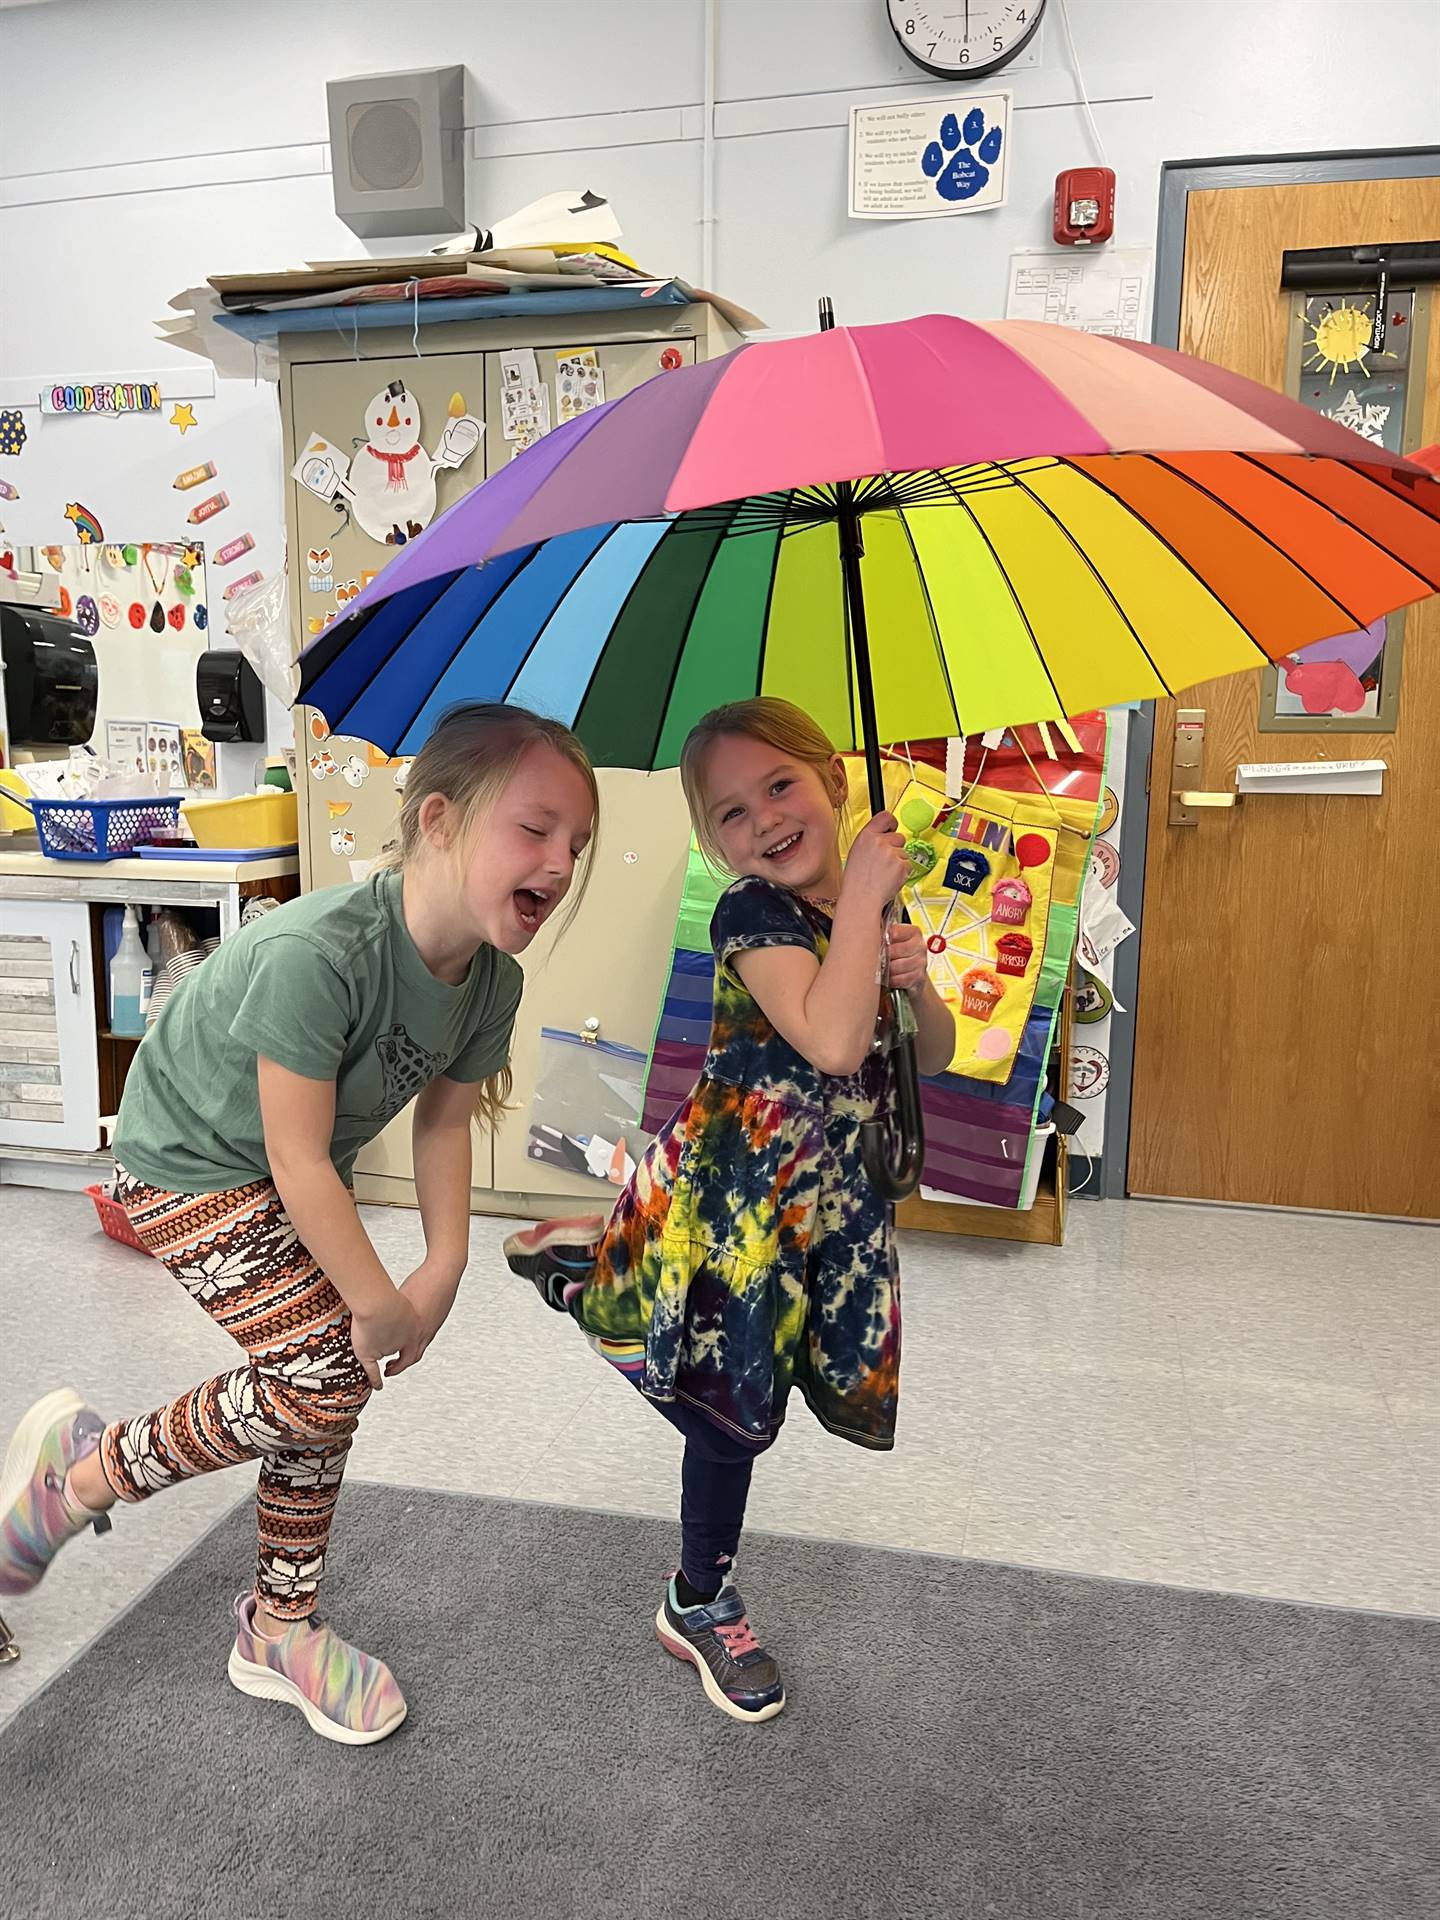 Students laughing under a rainbow colored umbrella.